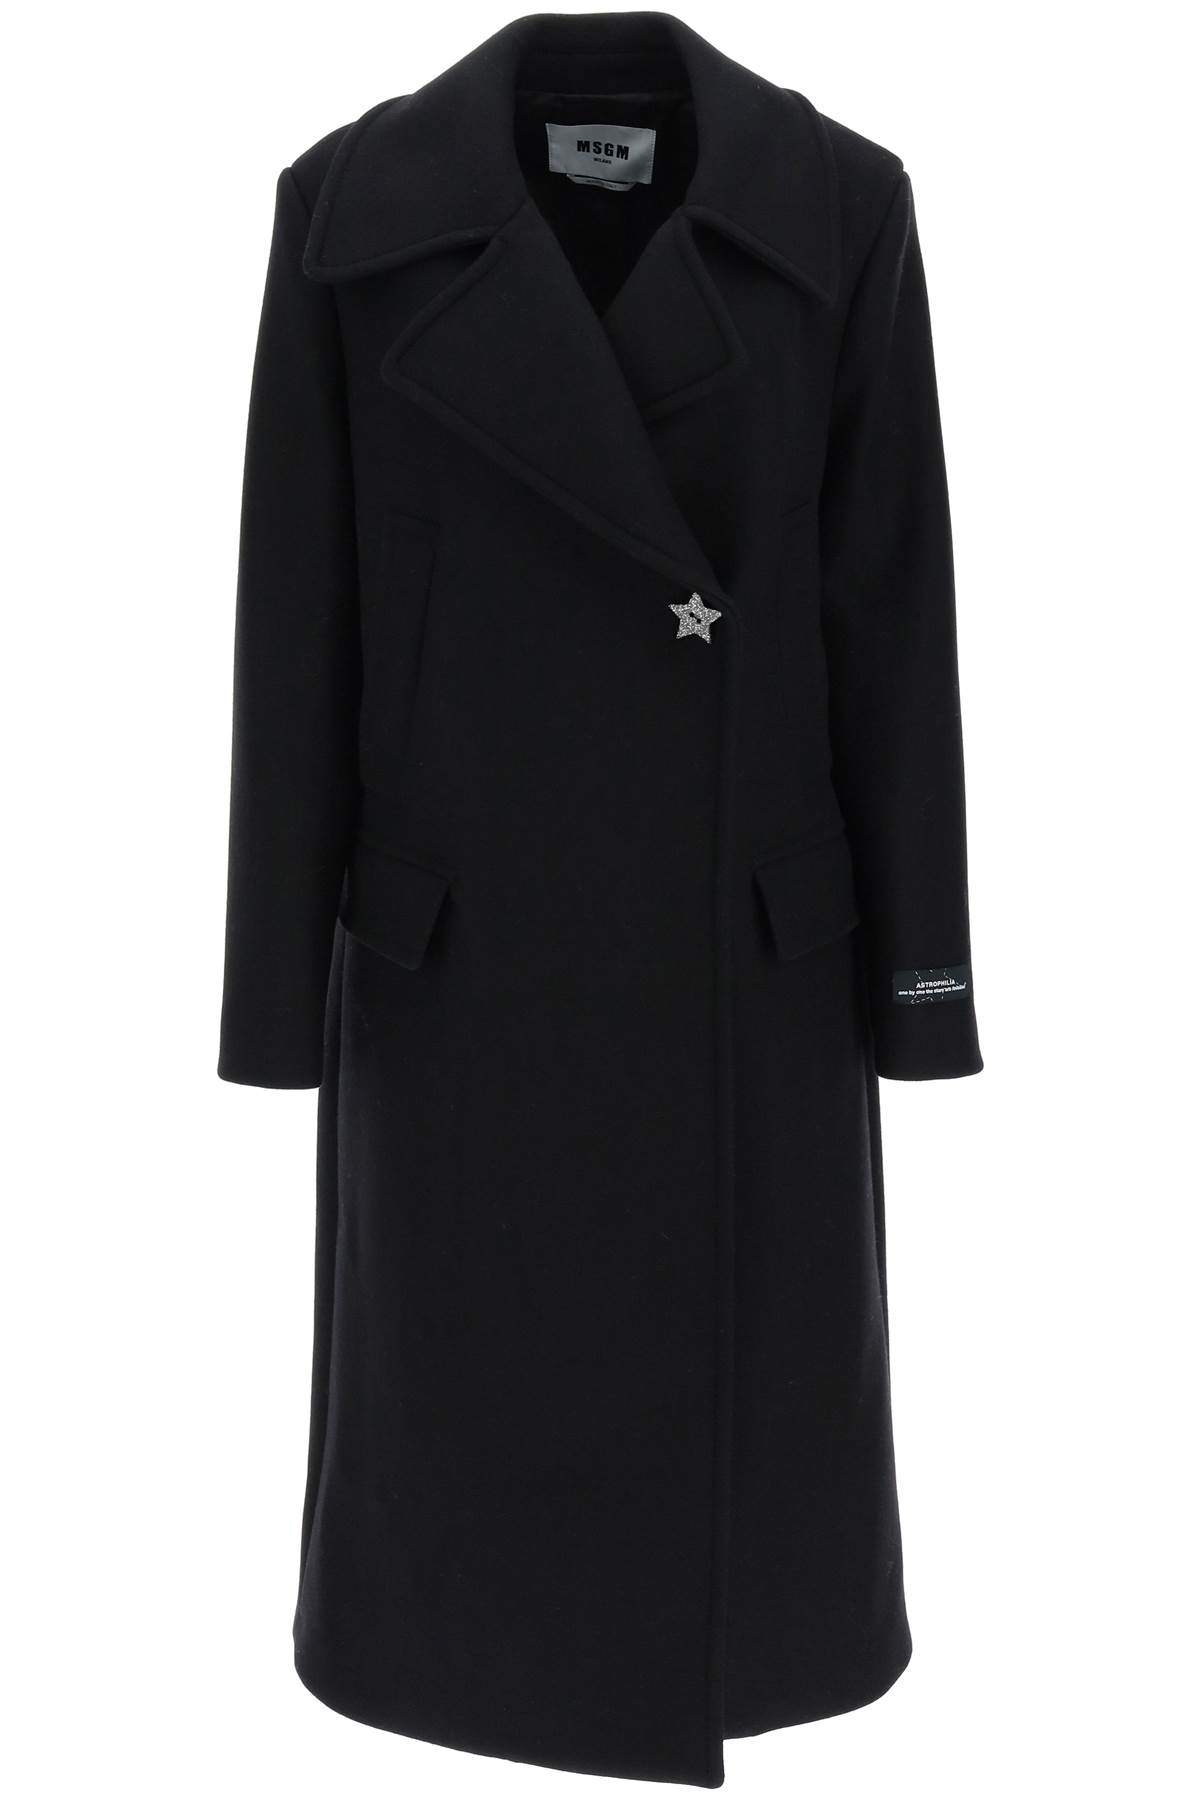 MSGM ASTROPHILIA LONG DOUBLE-BREASTED COAT